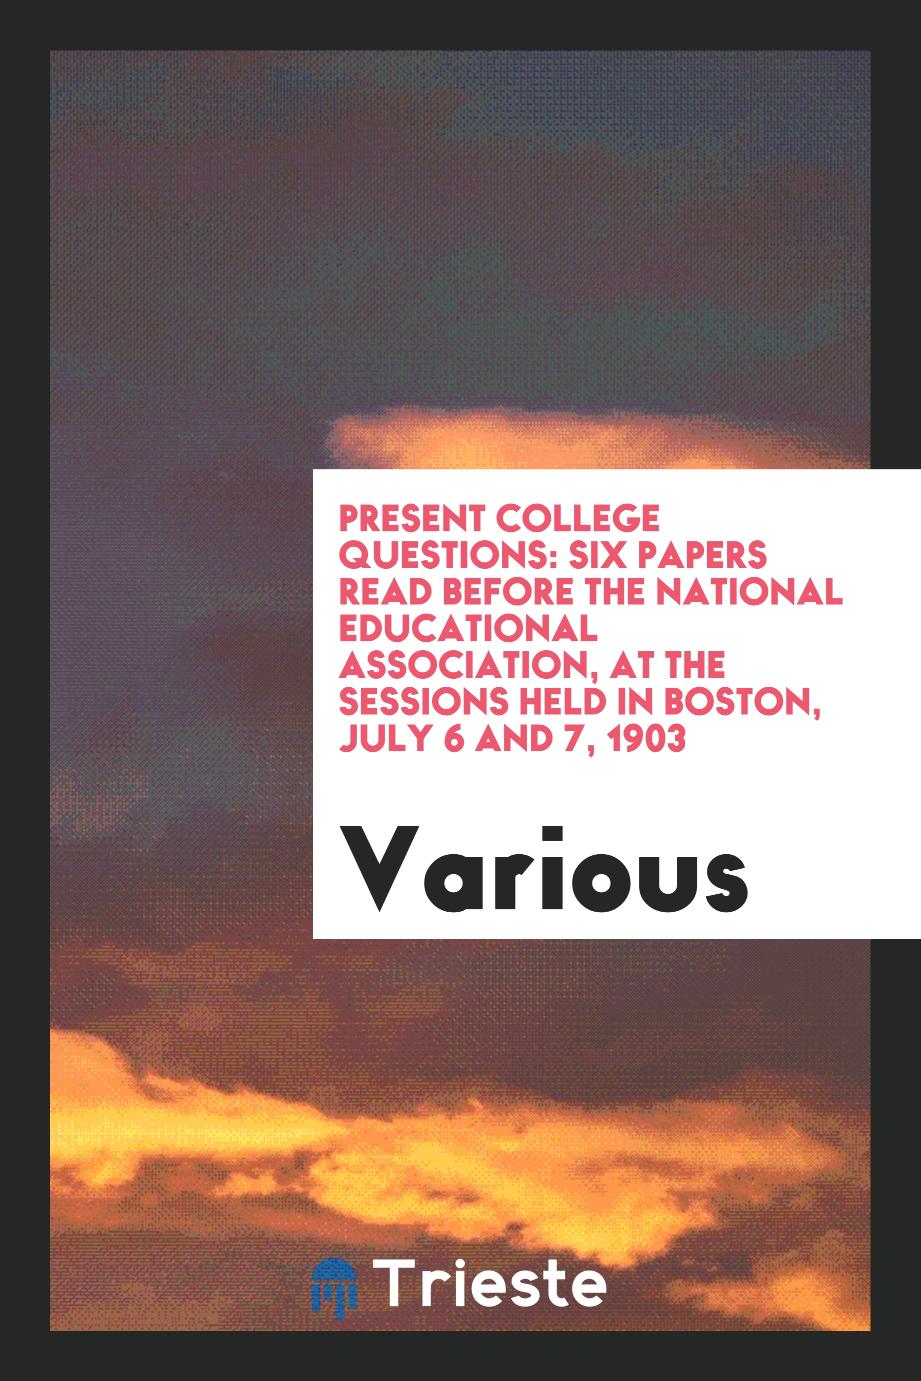 Present College Questions: Six Papers Read before the National Educational Association, at the Sessions Held in Boston, July 6 and 7, 1903